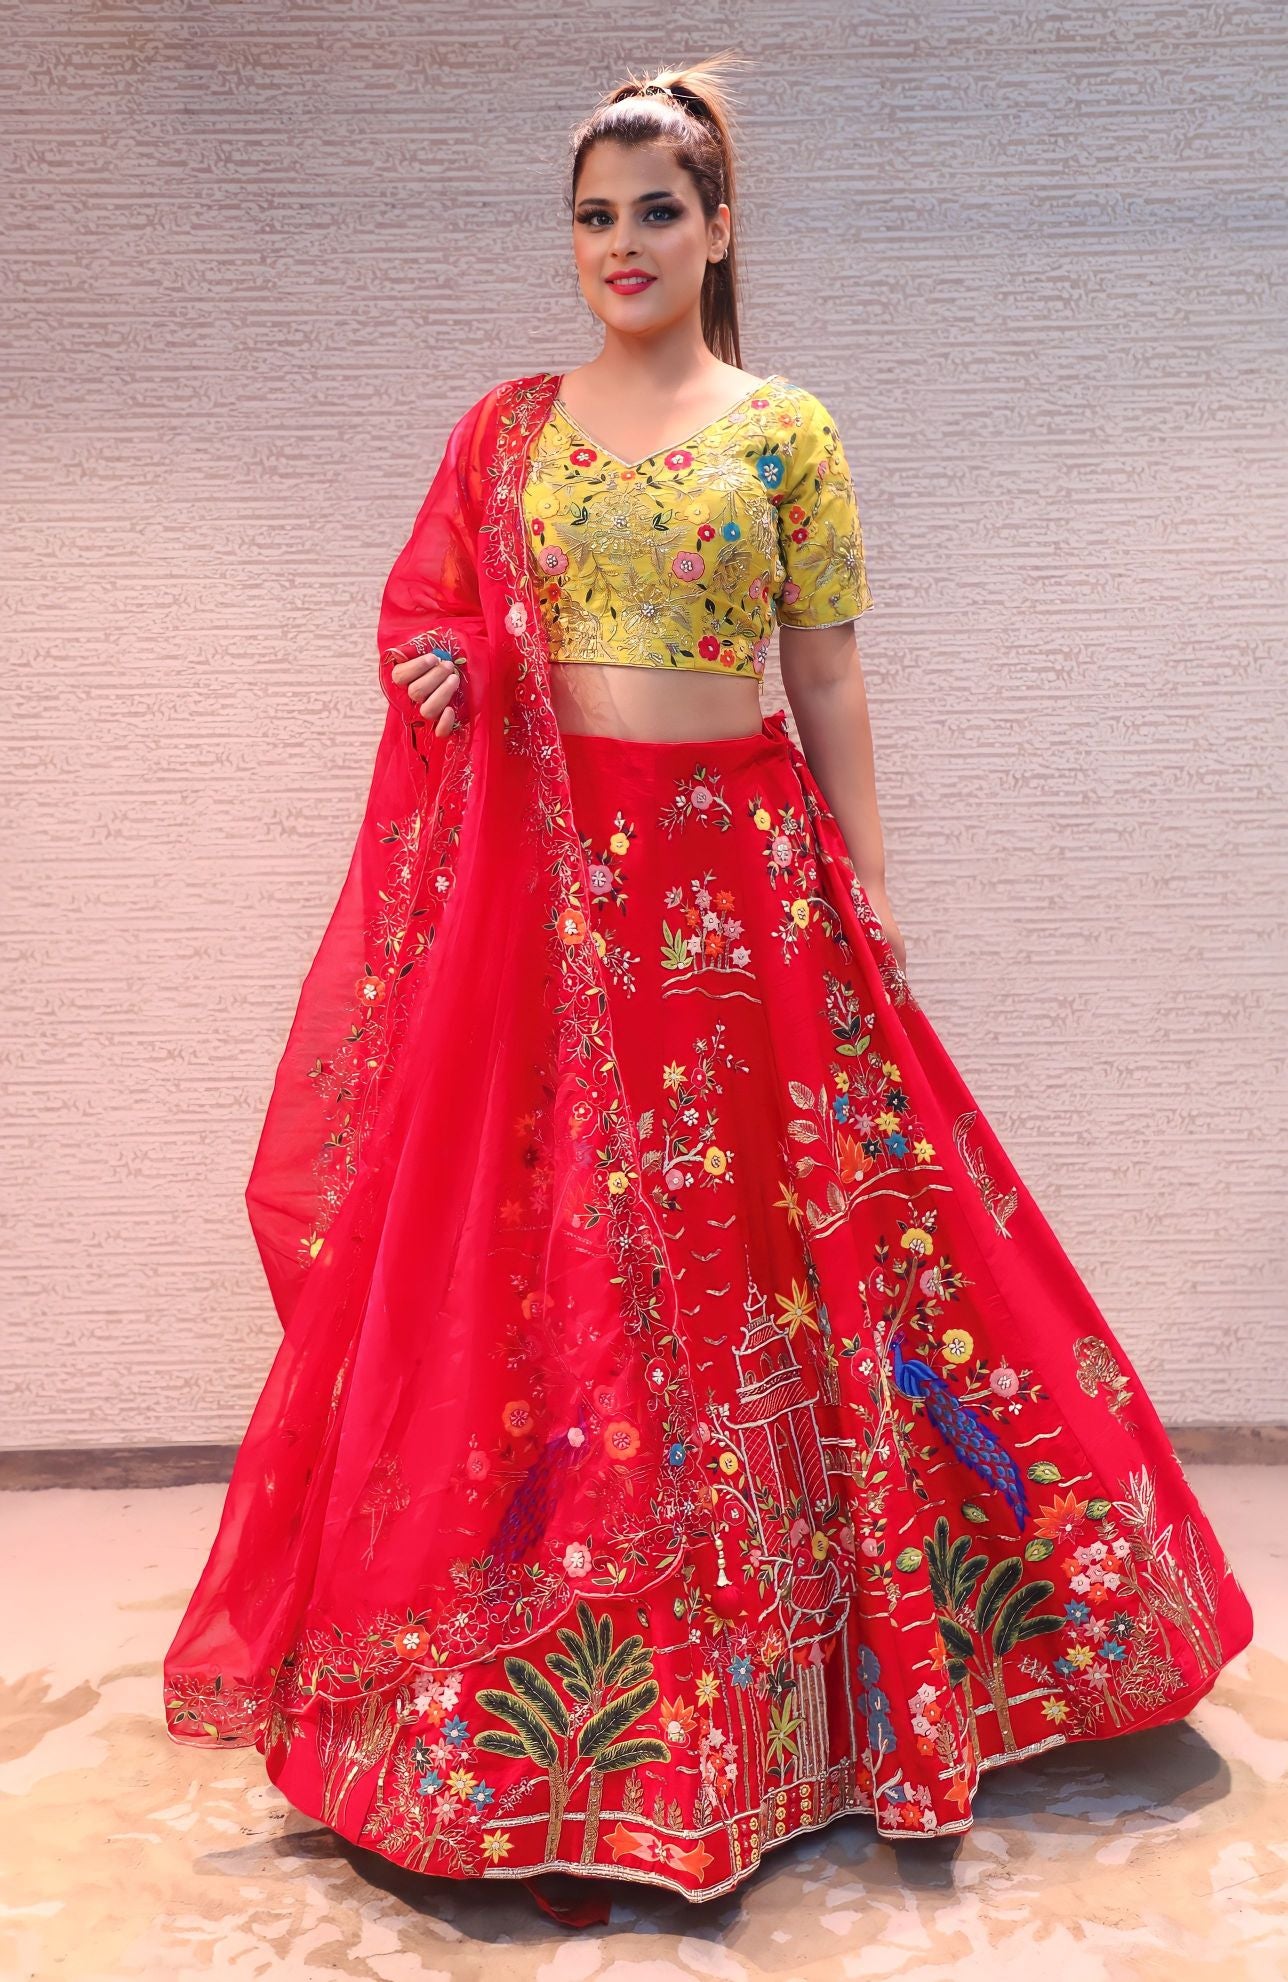 classy yellow & red color floral motif embroidered lehenga